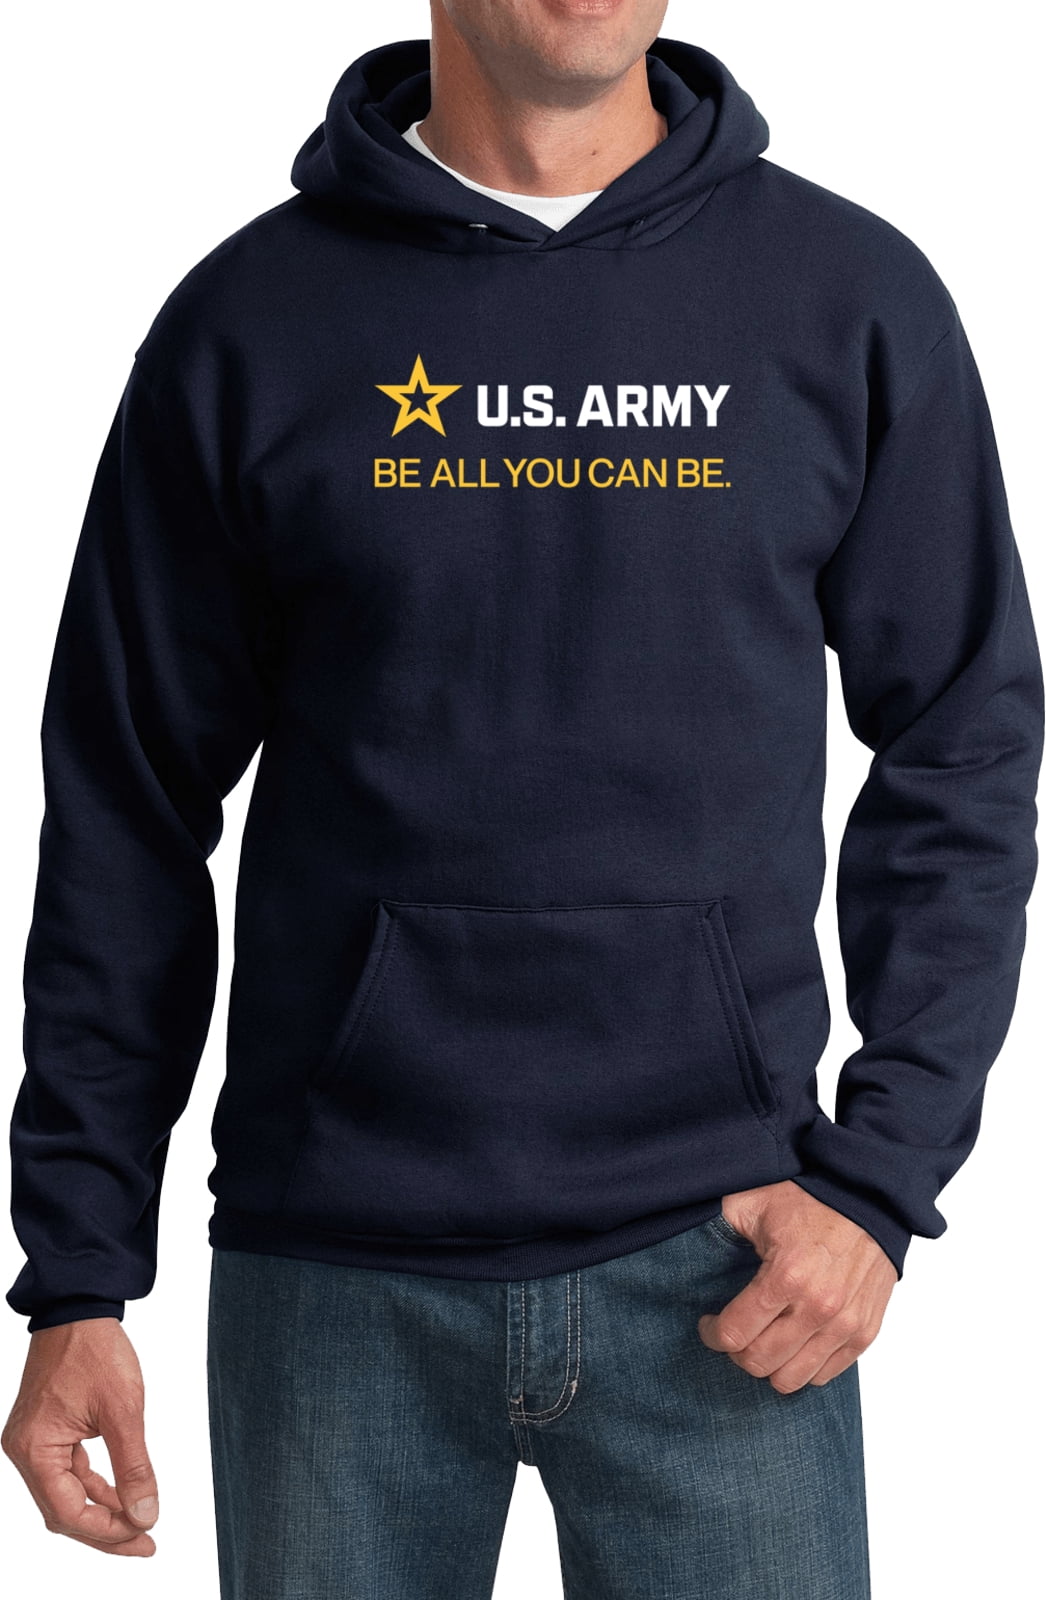 US Army Be All You Can Be White and Gold Strip Pullover Hoodie, XL Navy ...